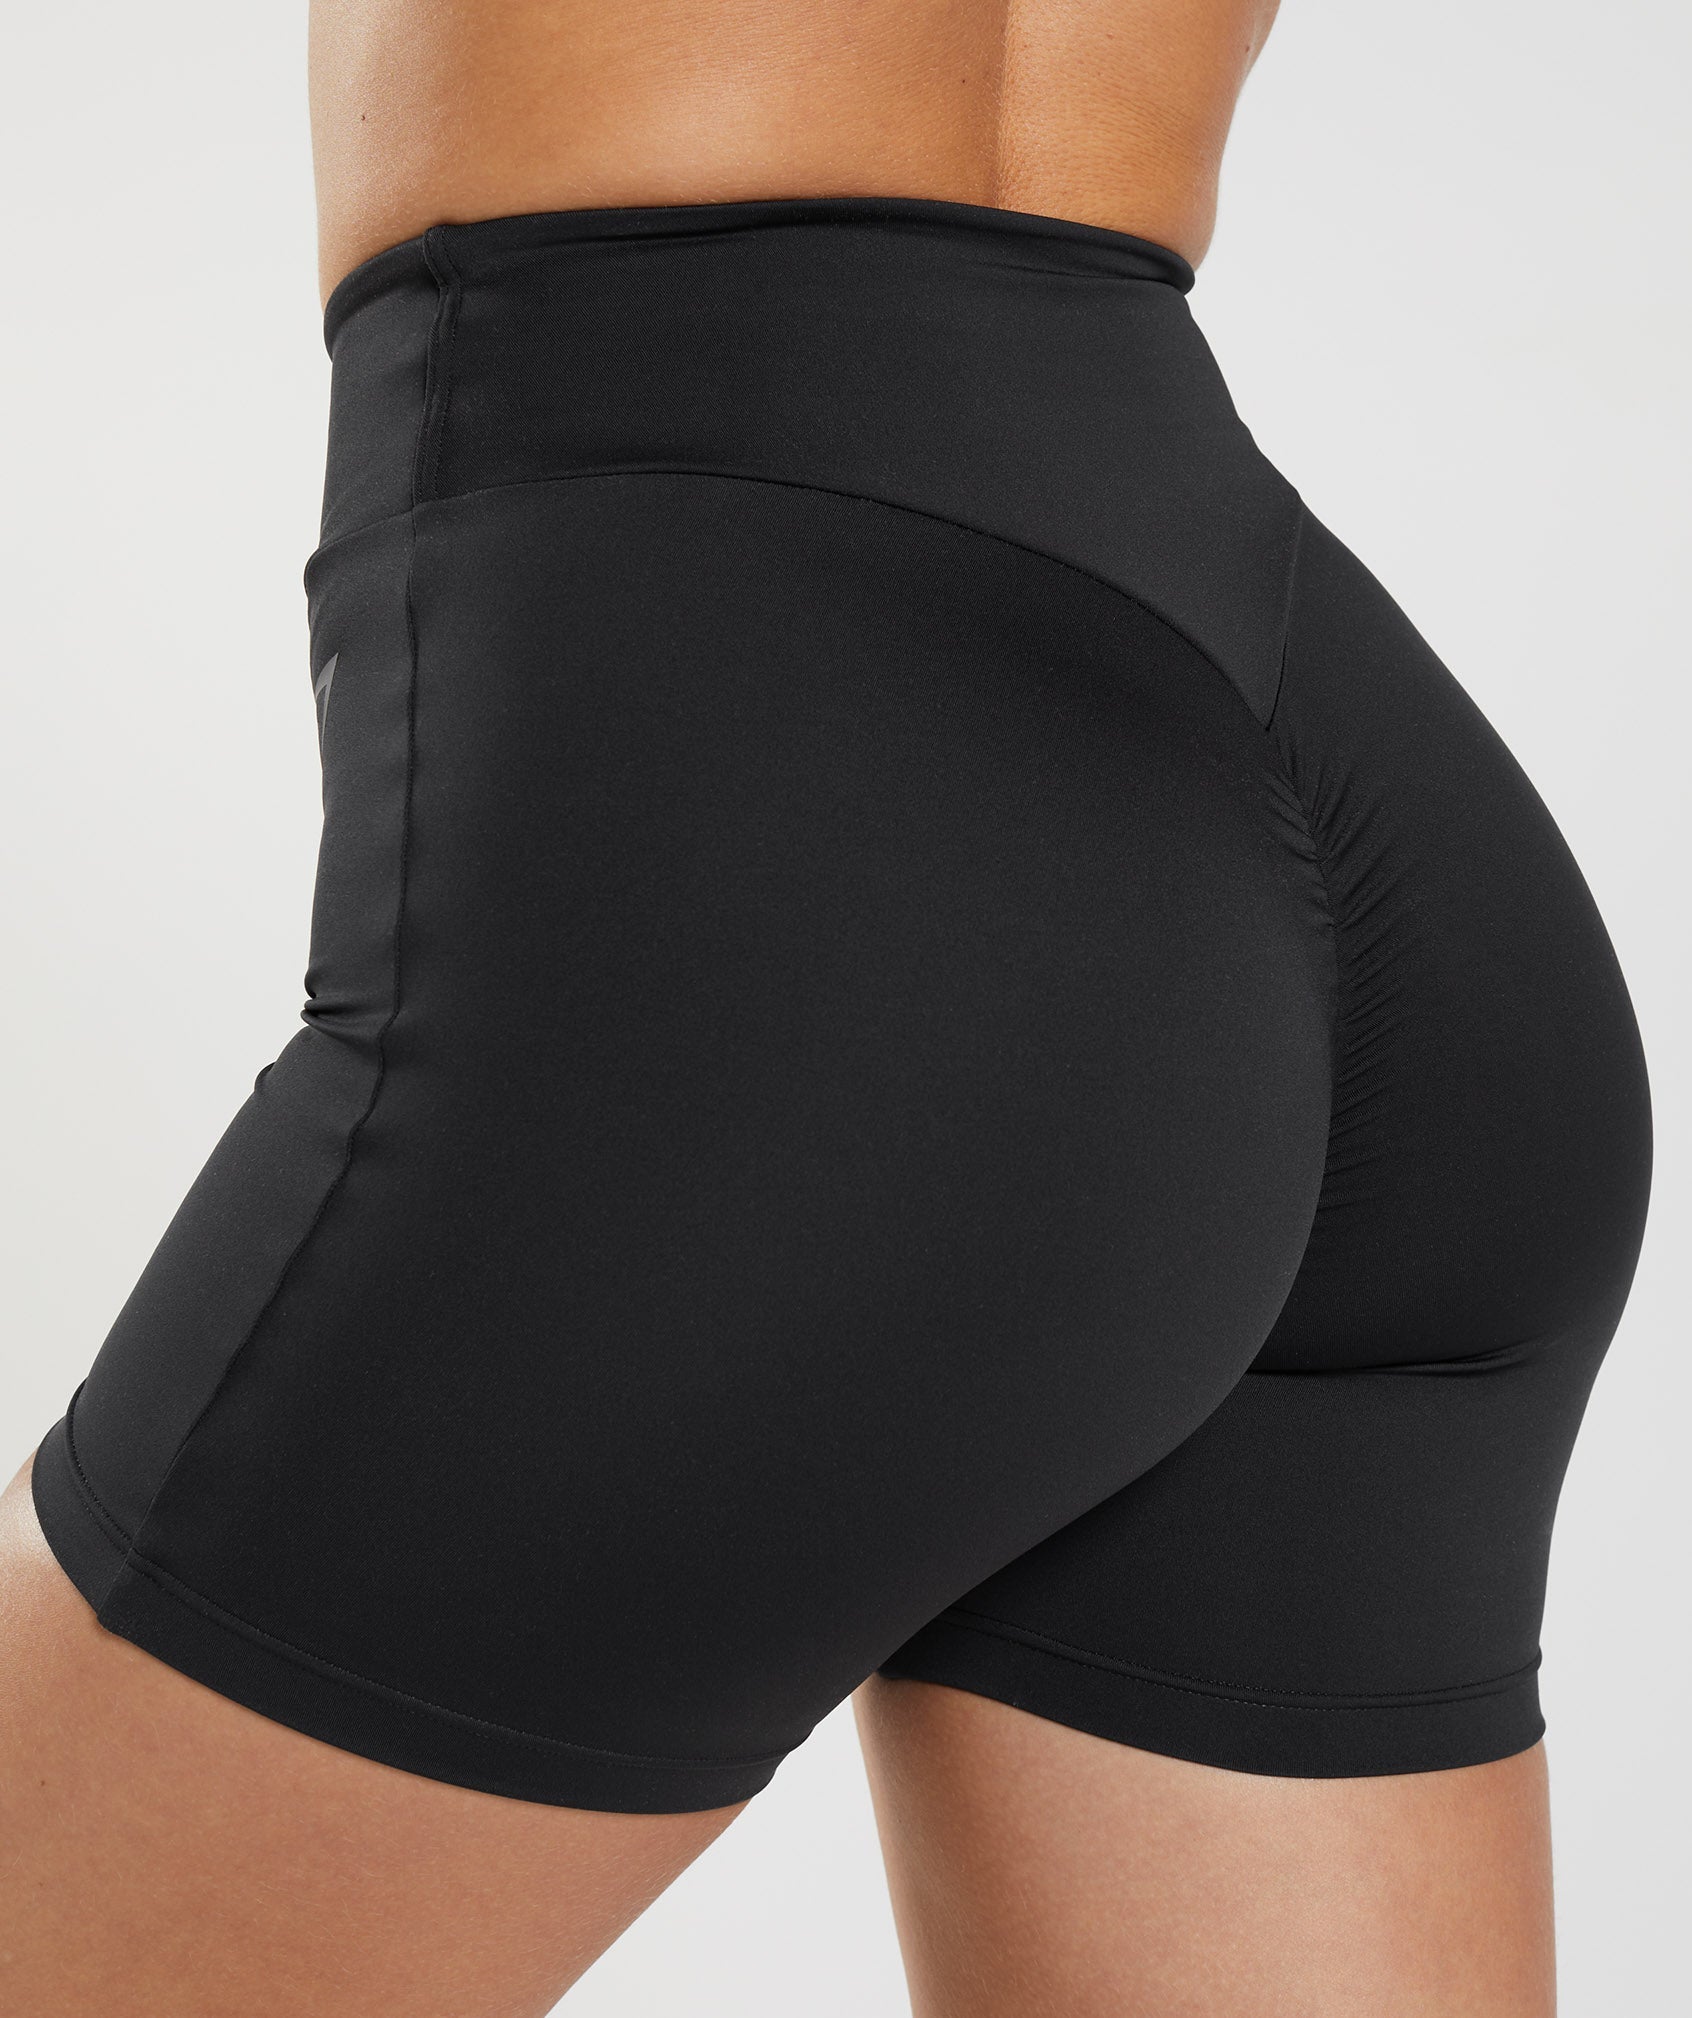 FBT Shorts with Inner Tights #838